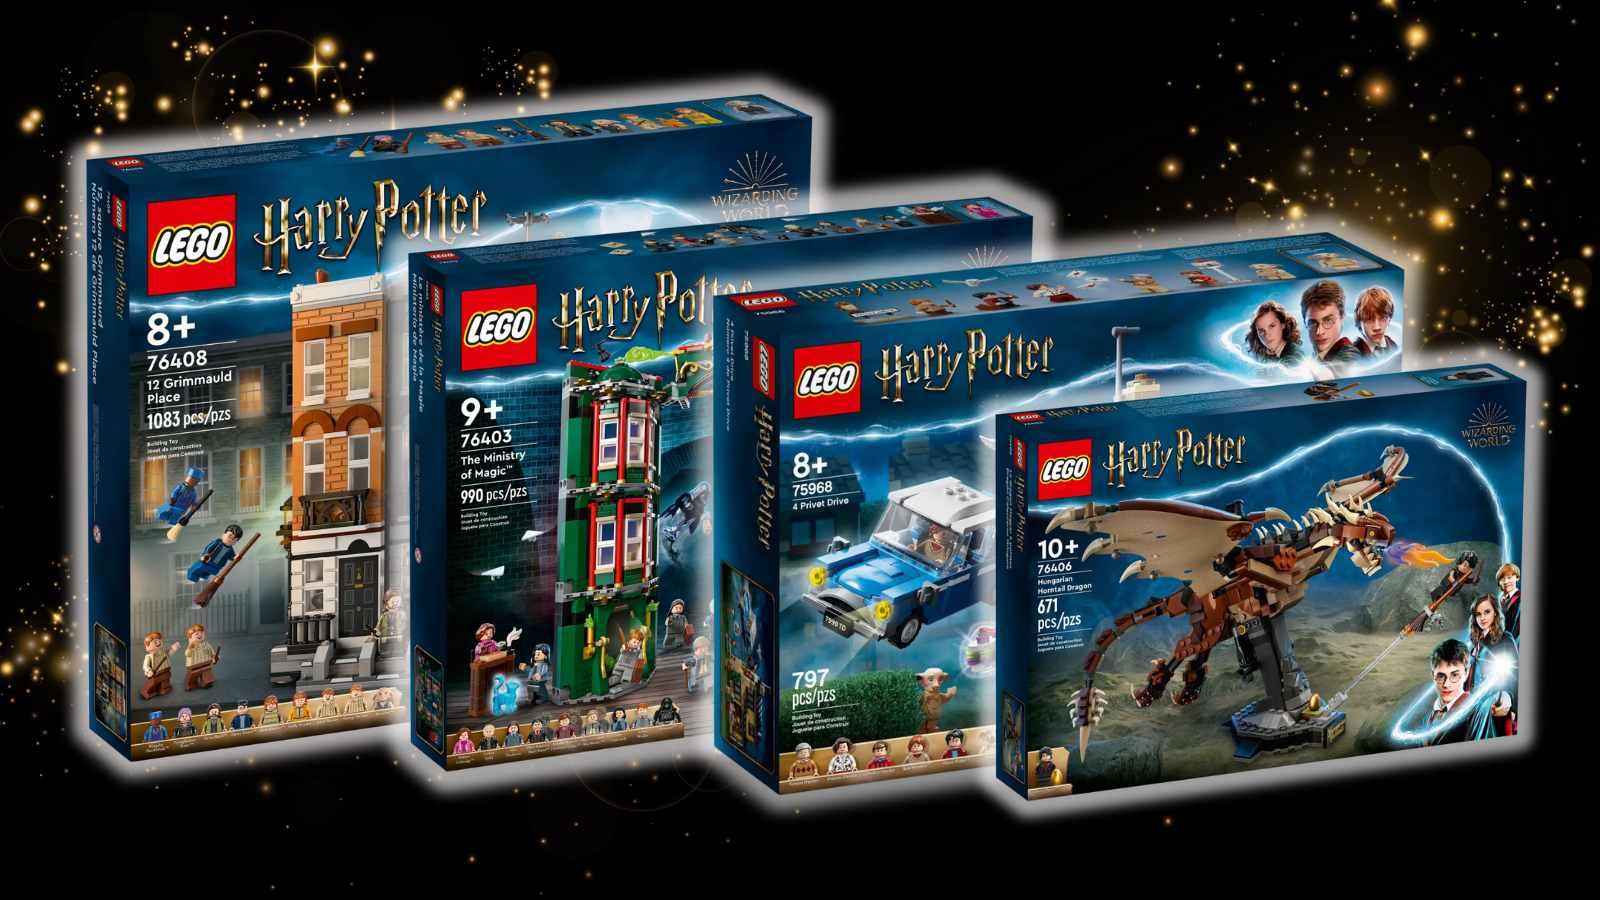 Four of the retiring LEGO Harry Potter sets on a black background with some magical graphics.